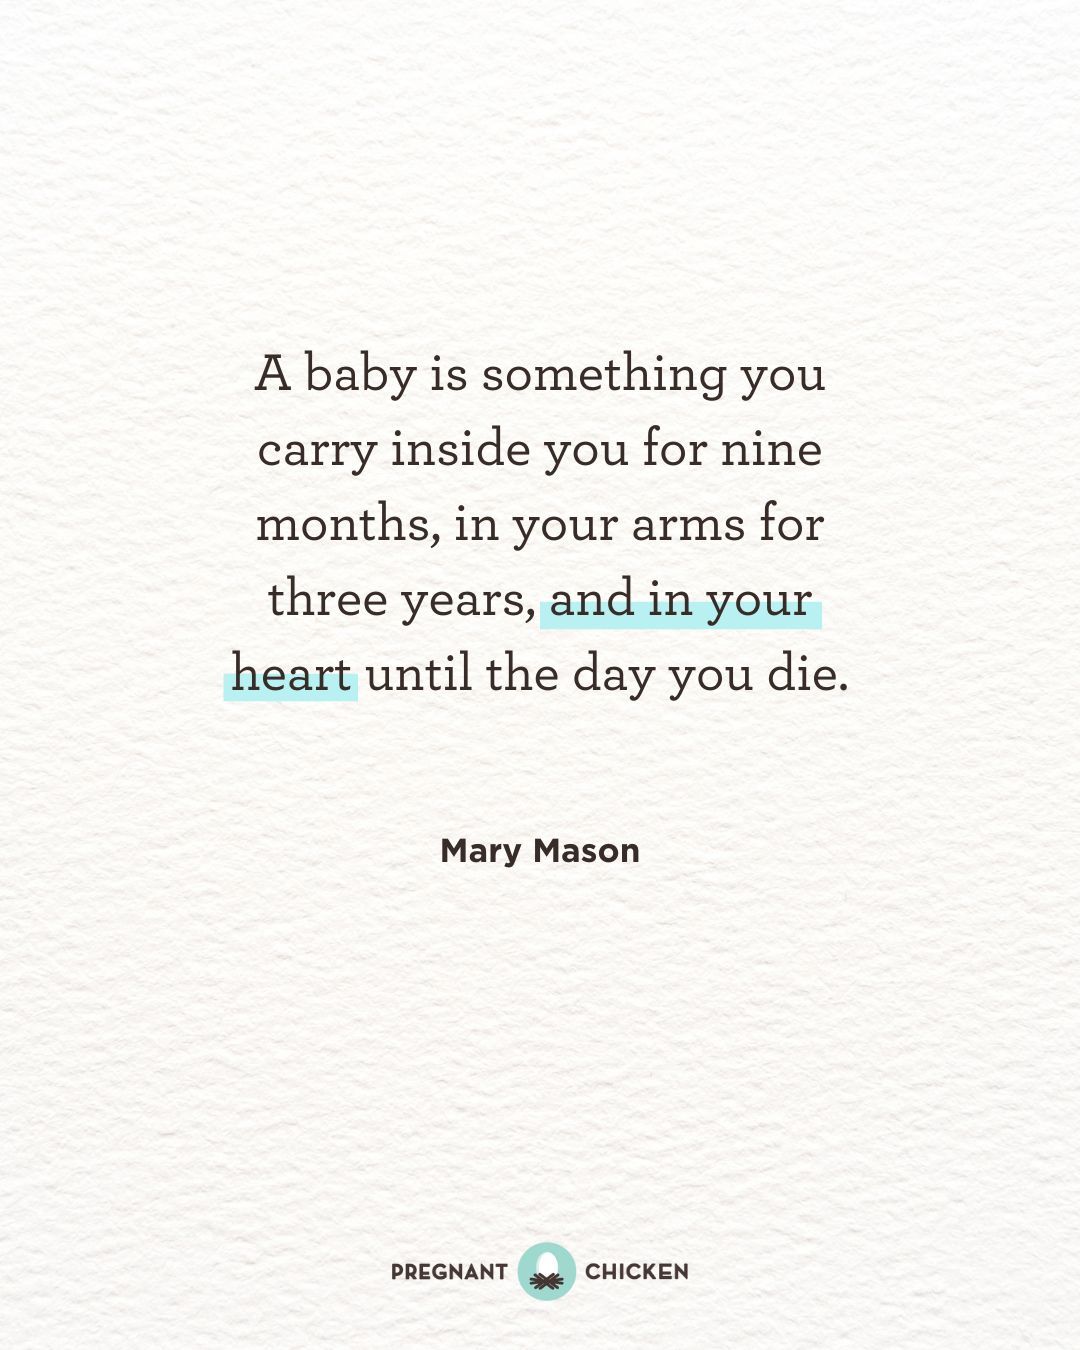 A baby is something you carry inside you for nine months, in your arms for three years, and in your heart until the day you die.